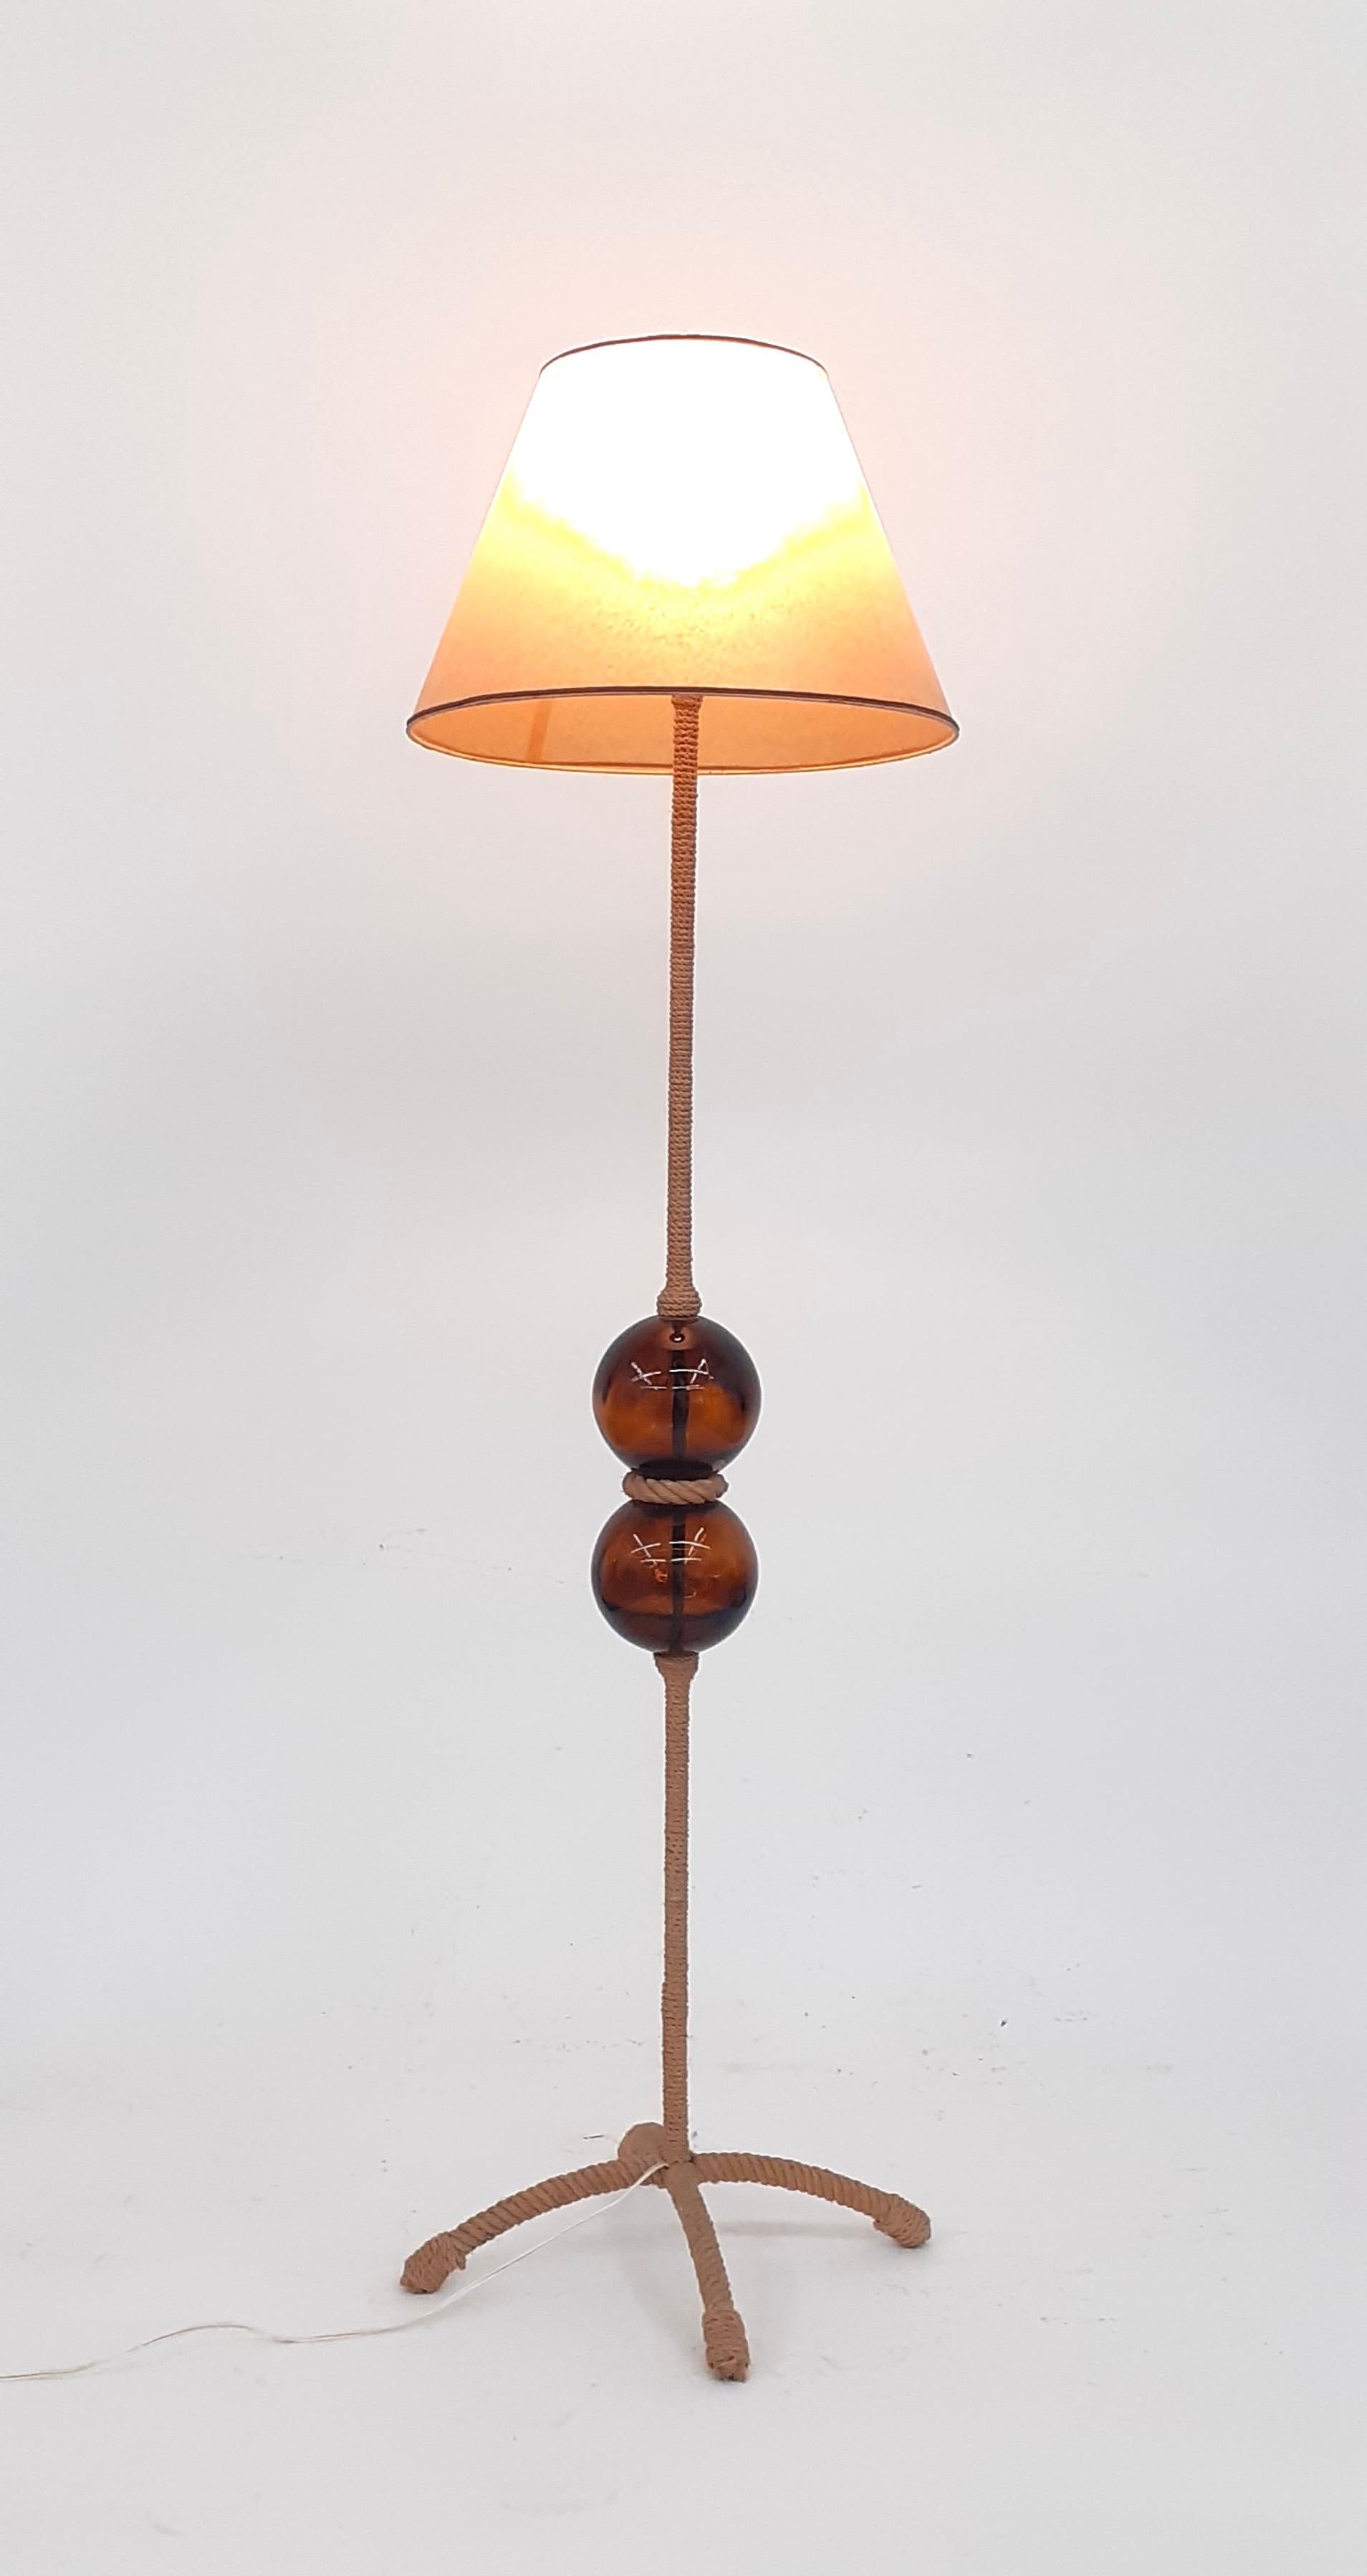 Rope and glass ball lamp floor by Audoux and Minnet, 1960s

without lampshade

Audoux-Minnet is a manufacturer of high-end garden, terrace and lounge furniture in rattan, bamboo and raffia rope.
In the 40s and 50s, designer couple Adrien Audoux